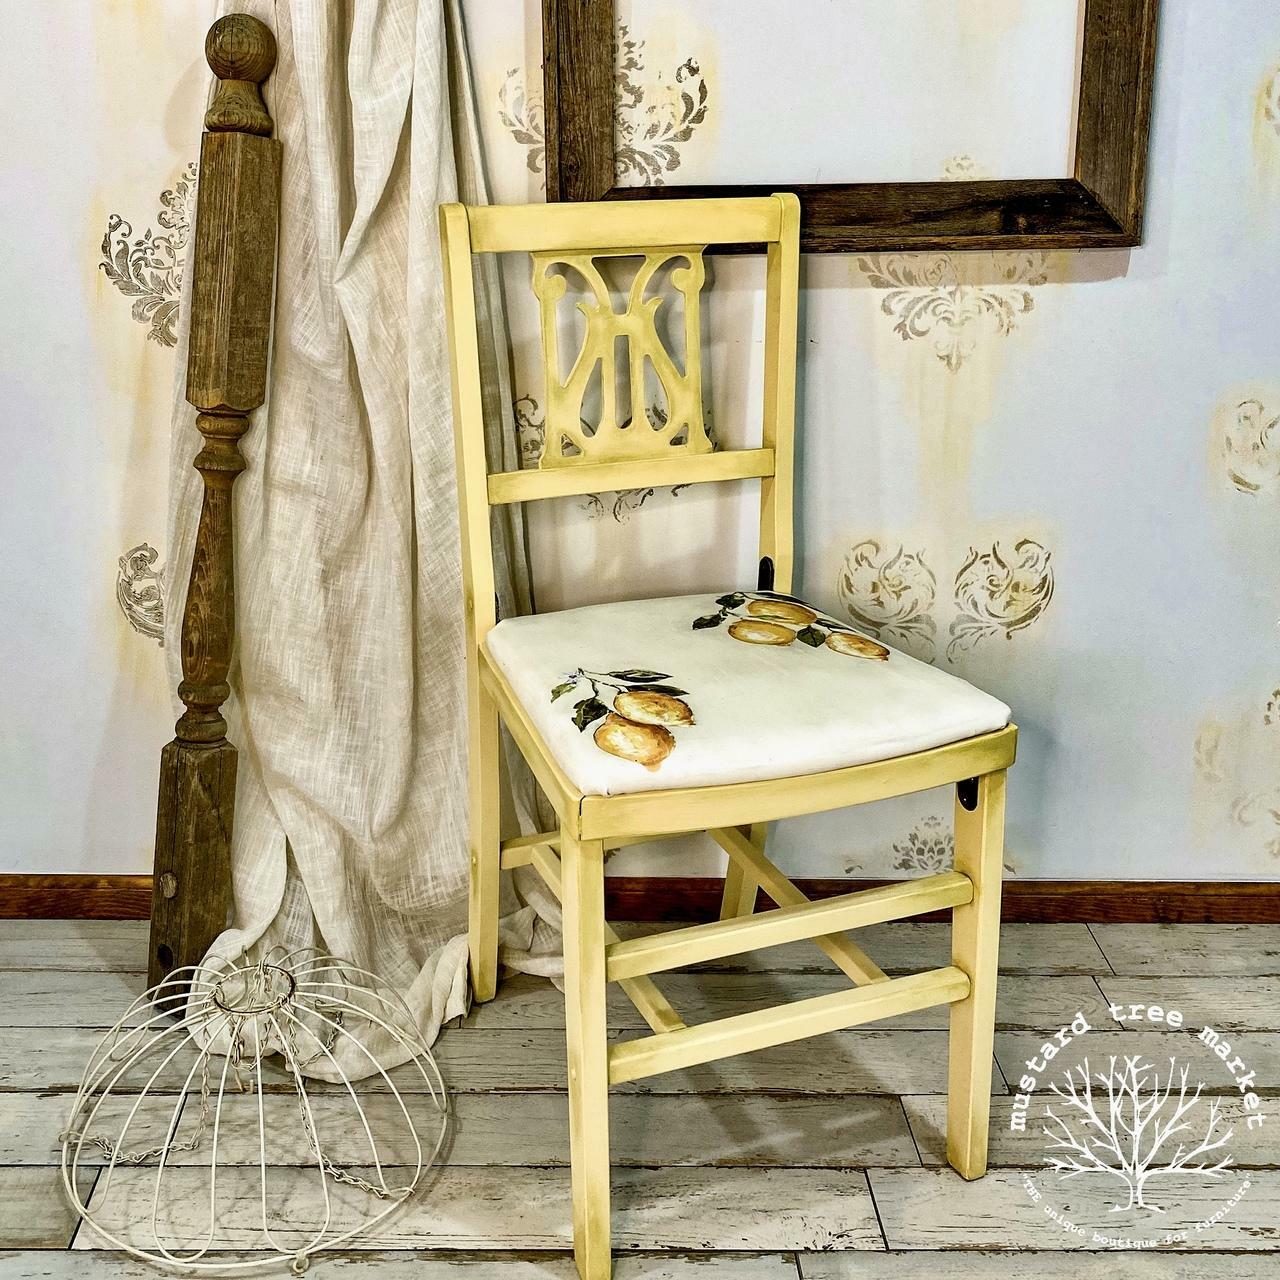 Rebel Yellow Dixie Belle Chalk Mineral Paint - Same Day Shipping - No VOC - Chalk Paint for Furniture and Cabinets - Water Based Paint - belleandbeau850